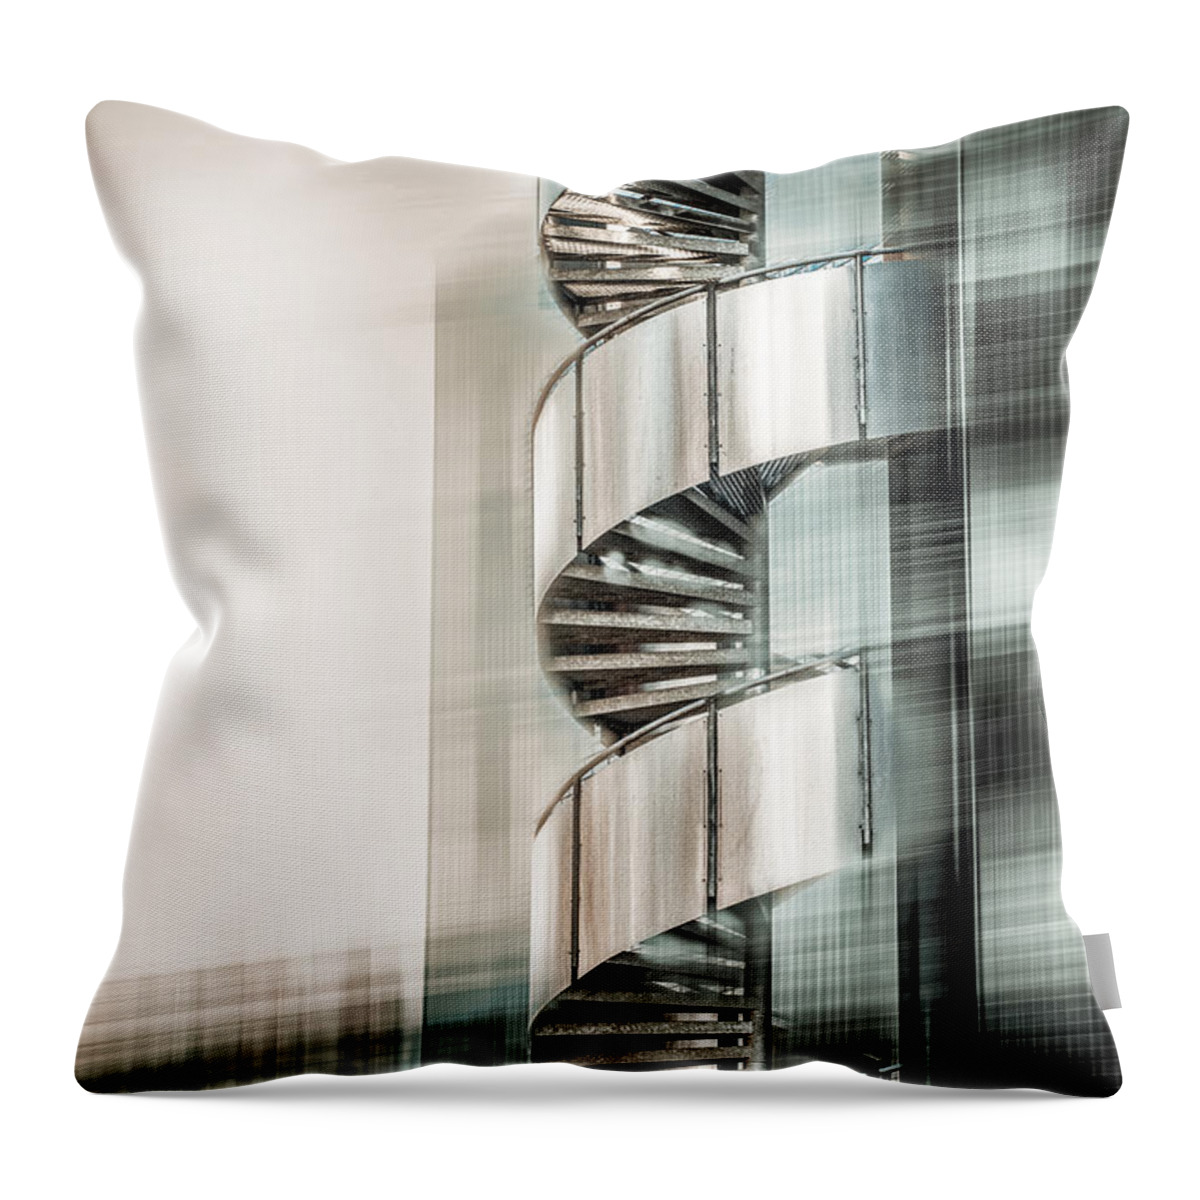 Stairs Throw Pillow featuring the digital art Urban Drill - Cyan by Hannes Cmarits